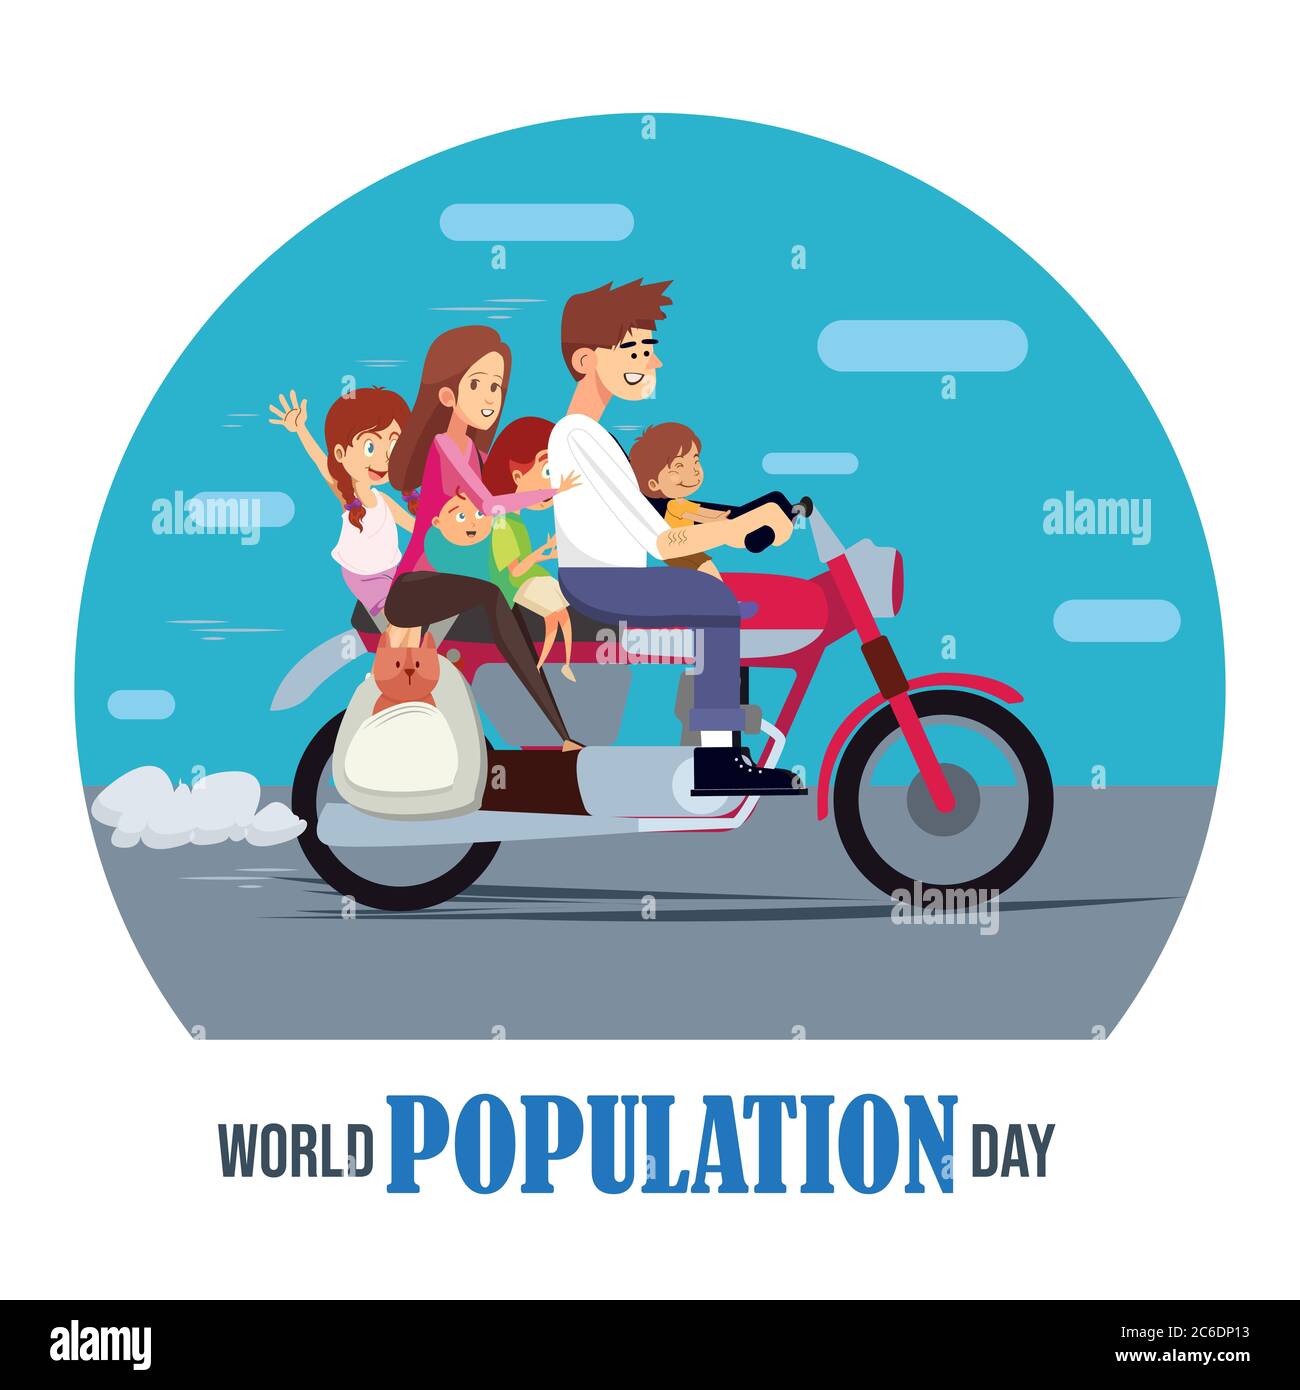 World population day, flat illustration of whole family with pet dog on a motorbike, motorcycle poster, vector Stock Vector